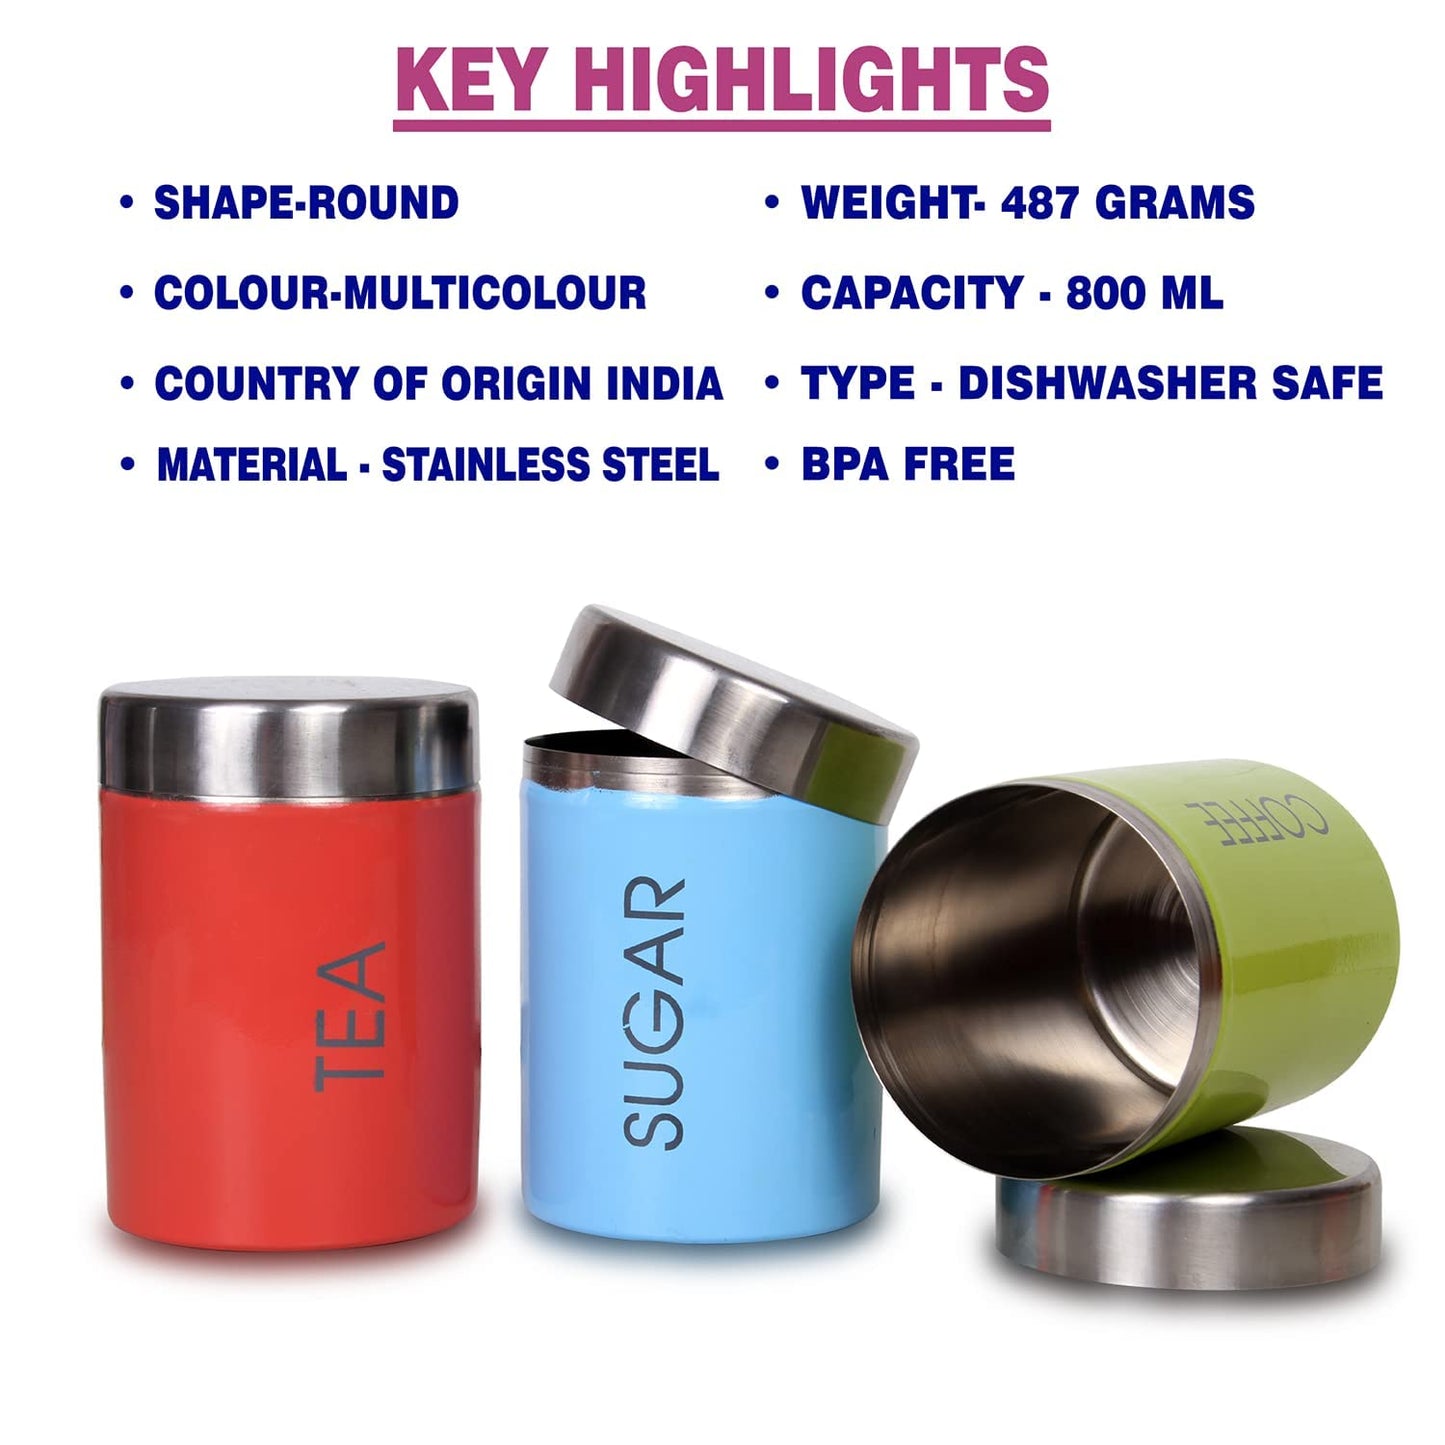 NATULIX Stainless Steel Rainbow Tea Coffee Sugar Container Set of 3 - 800ml each